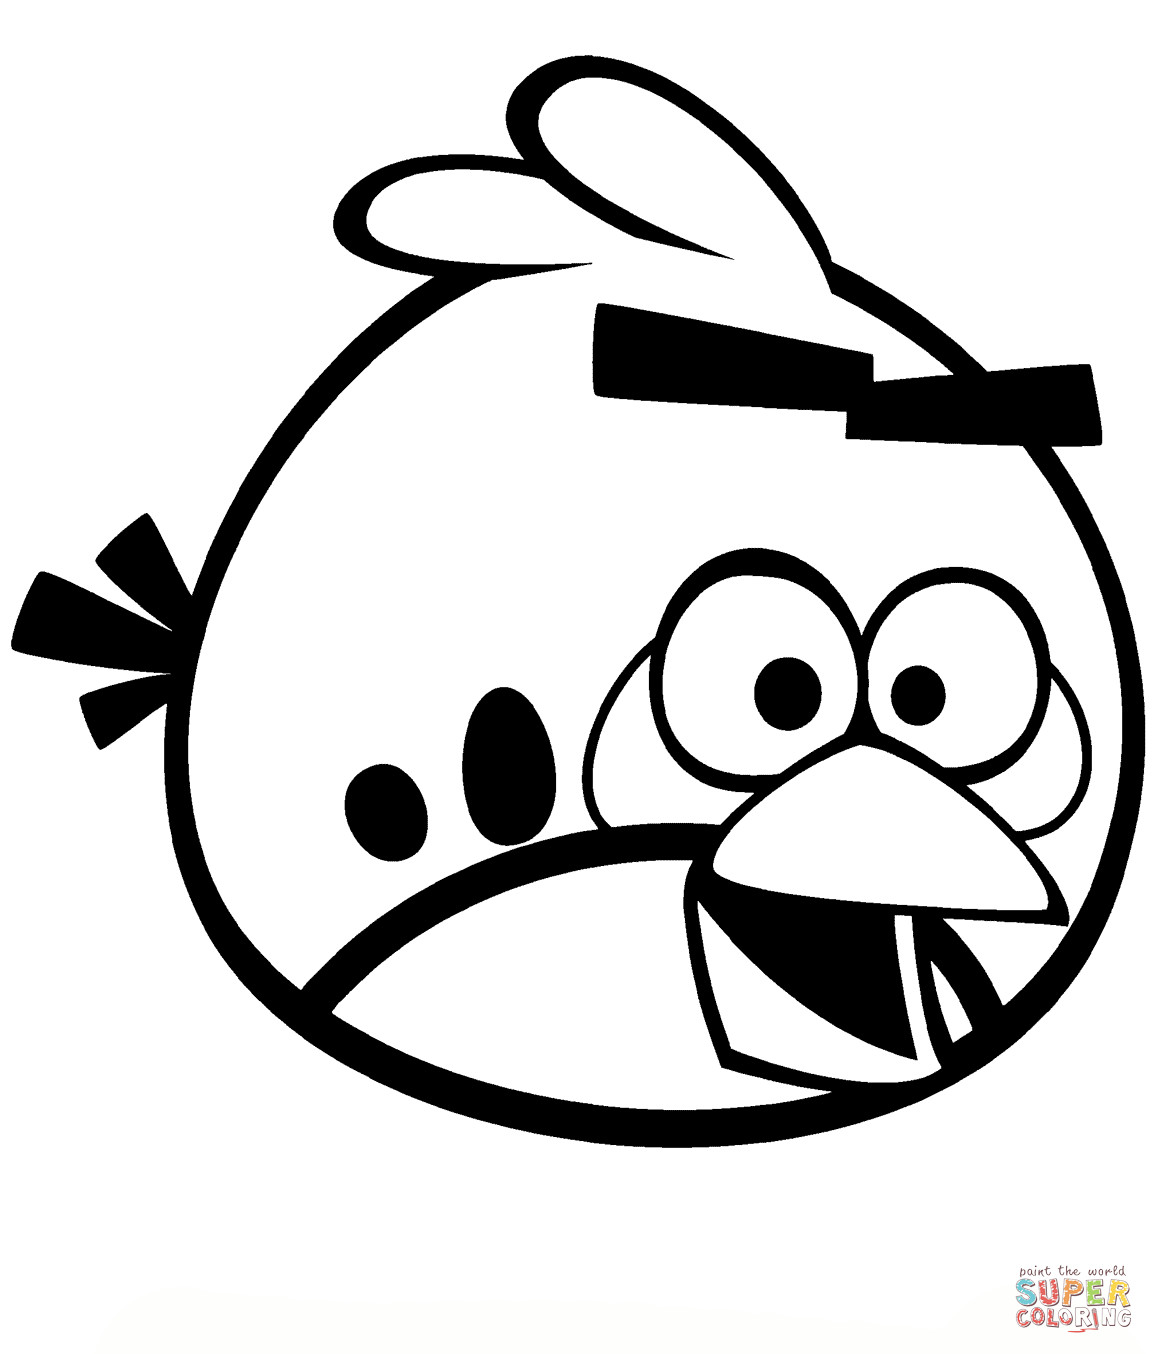 Angry Birds Coloring Pages
 Red Angry Bird coloring page